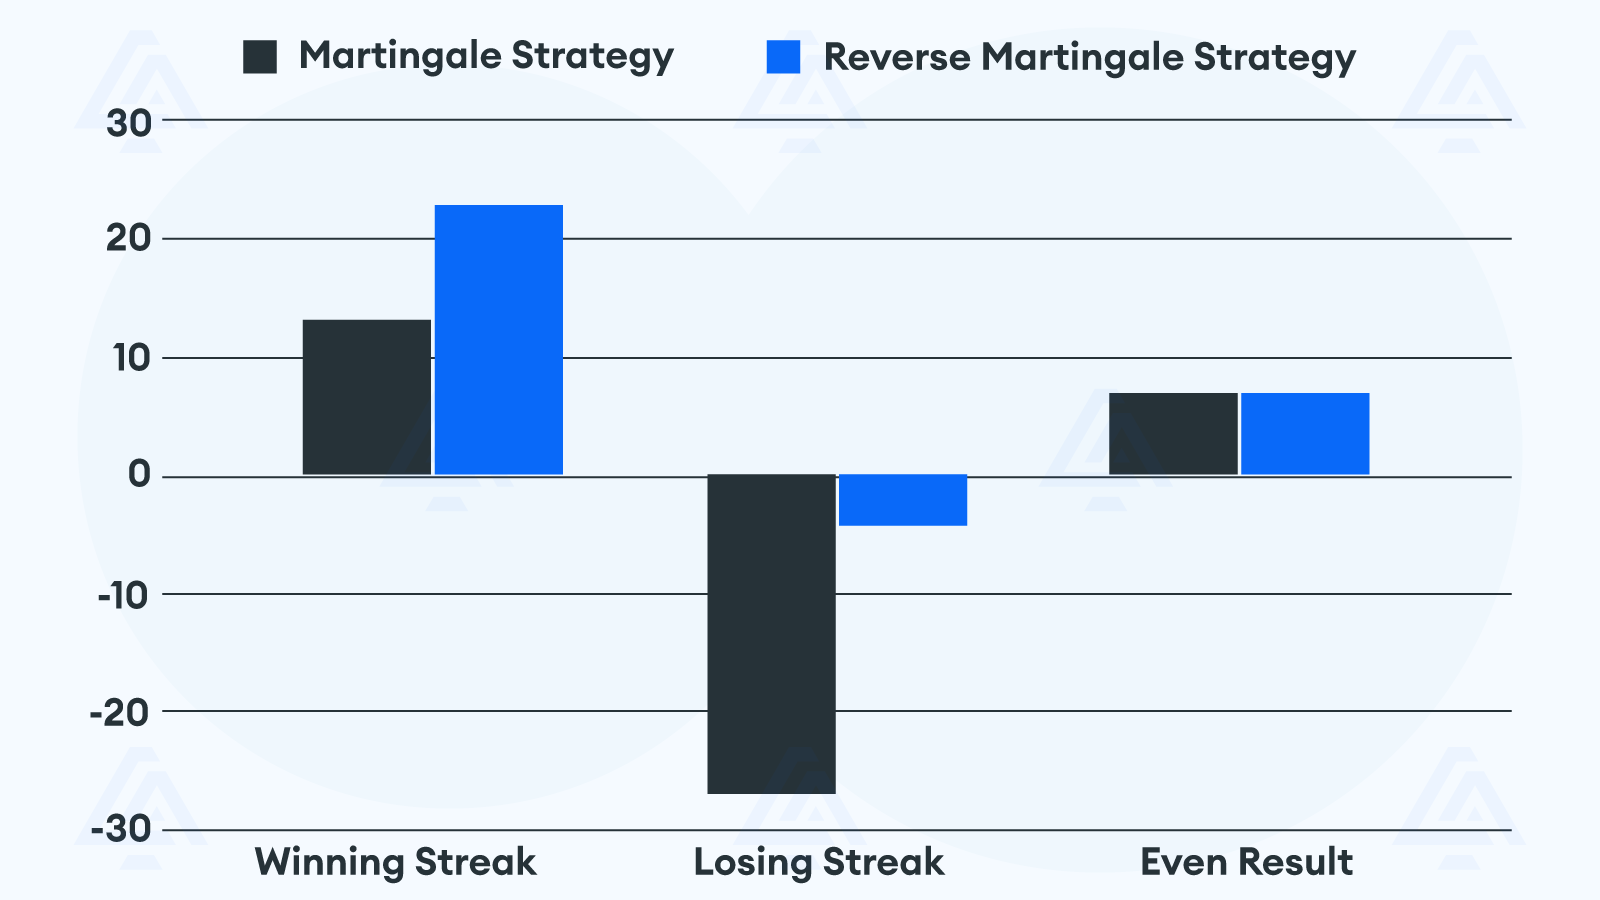 Built-in Issues for the Reverse Martingale Roulette Strategy